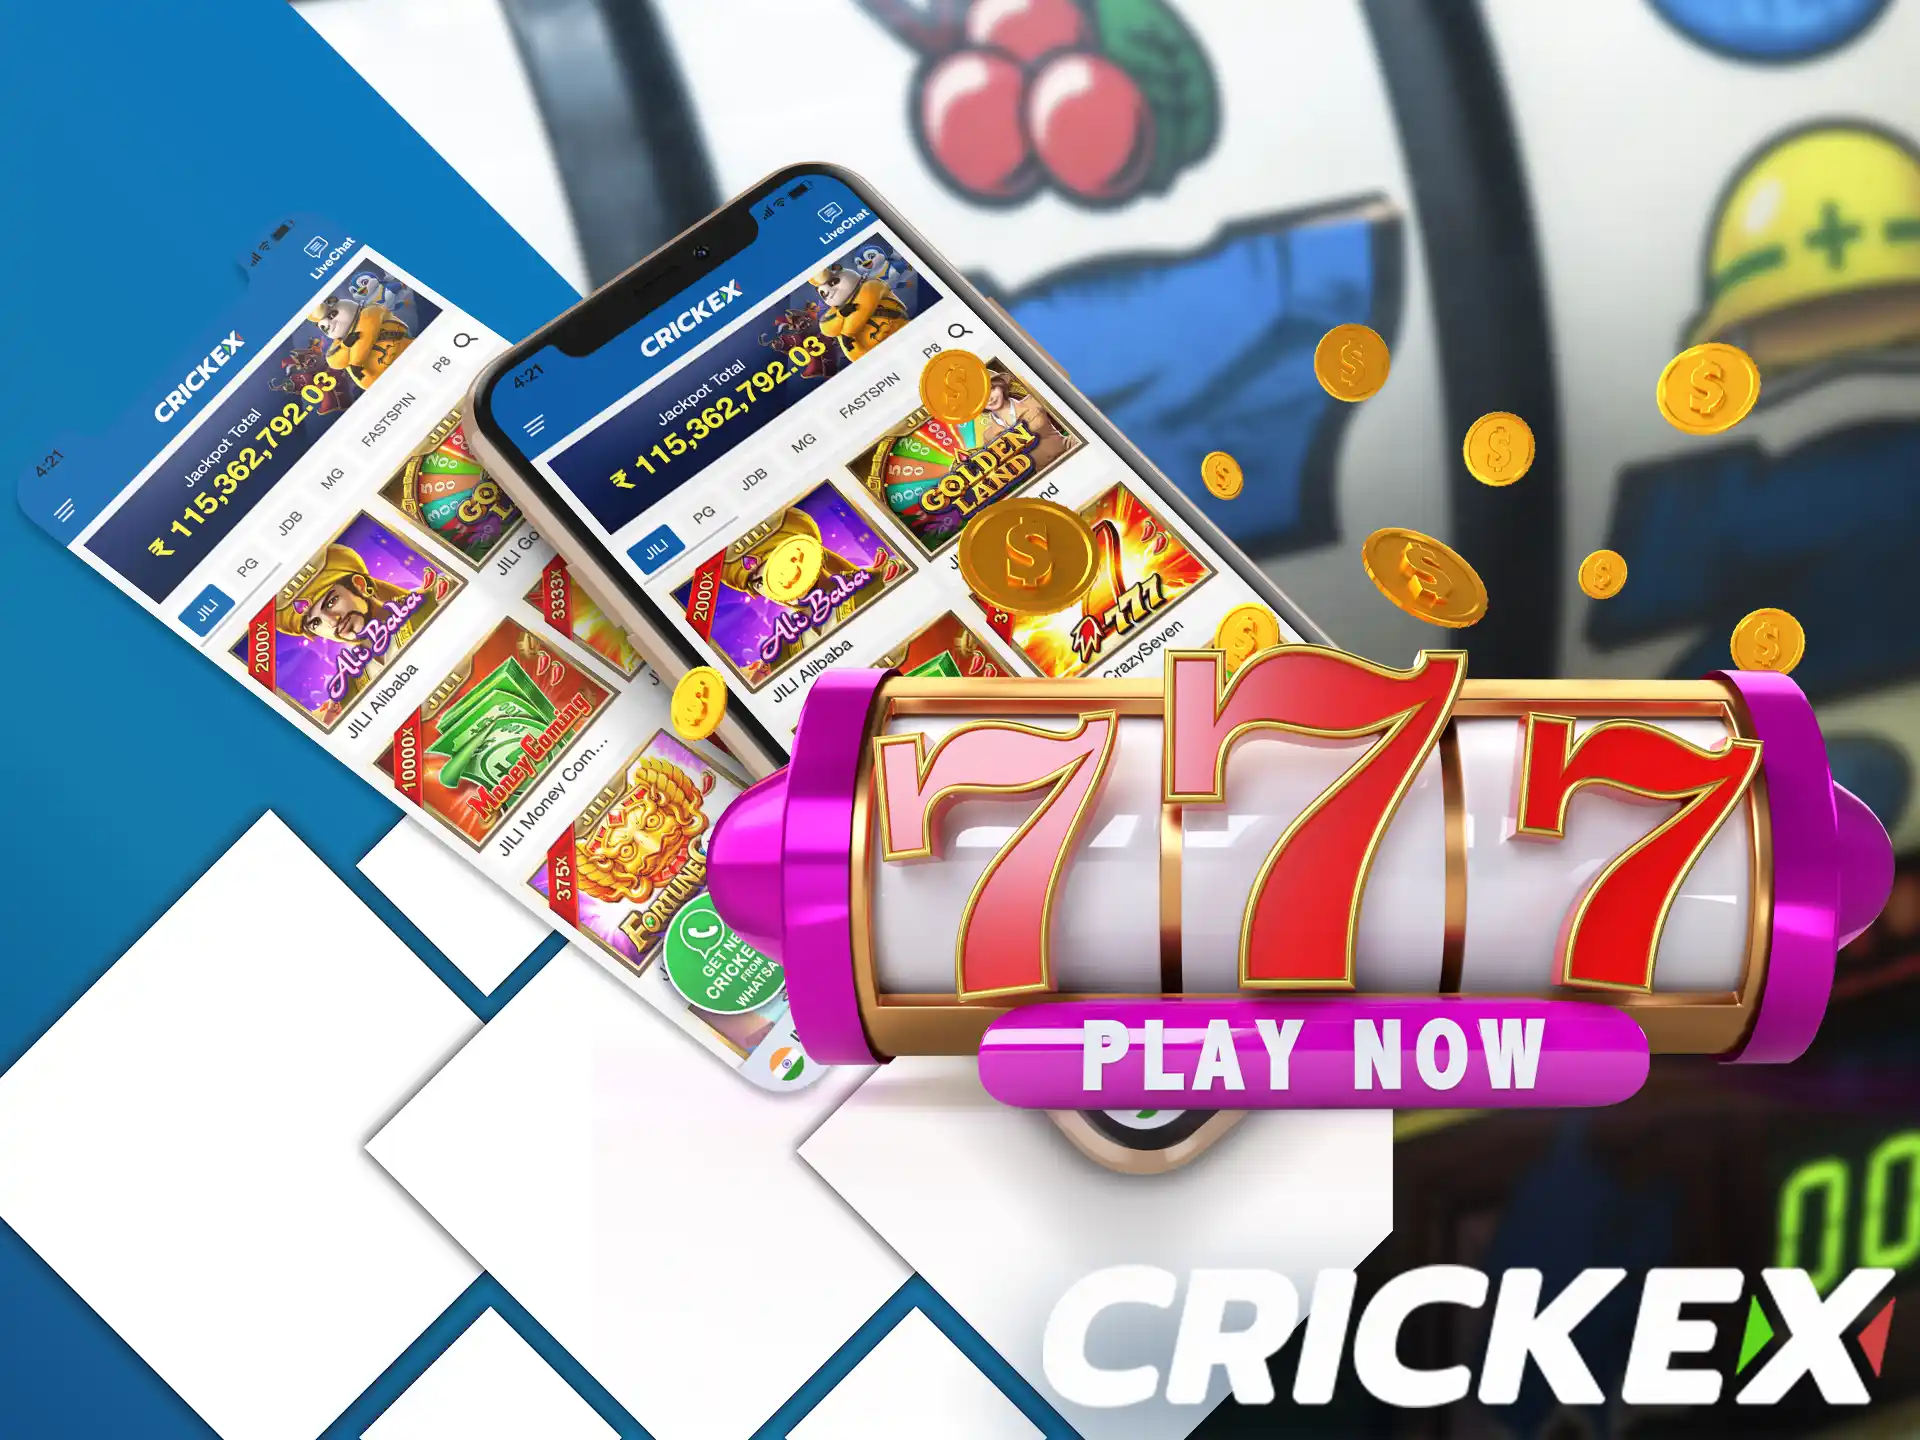 Users from Bangladesh have a unique opportunity to play slot machines directly from their smartphone on the Crickex app.